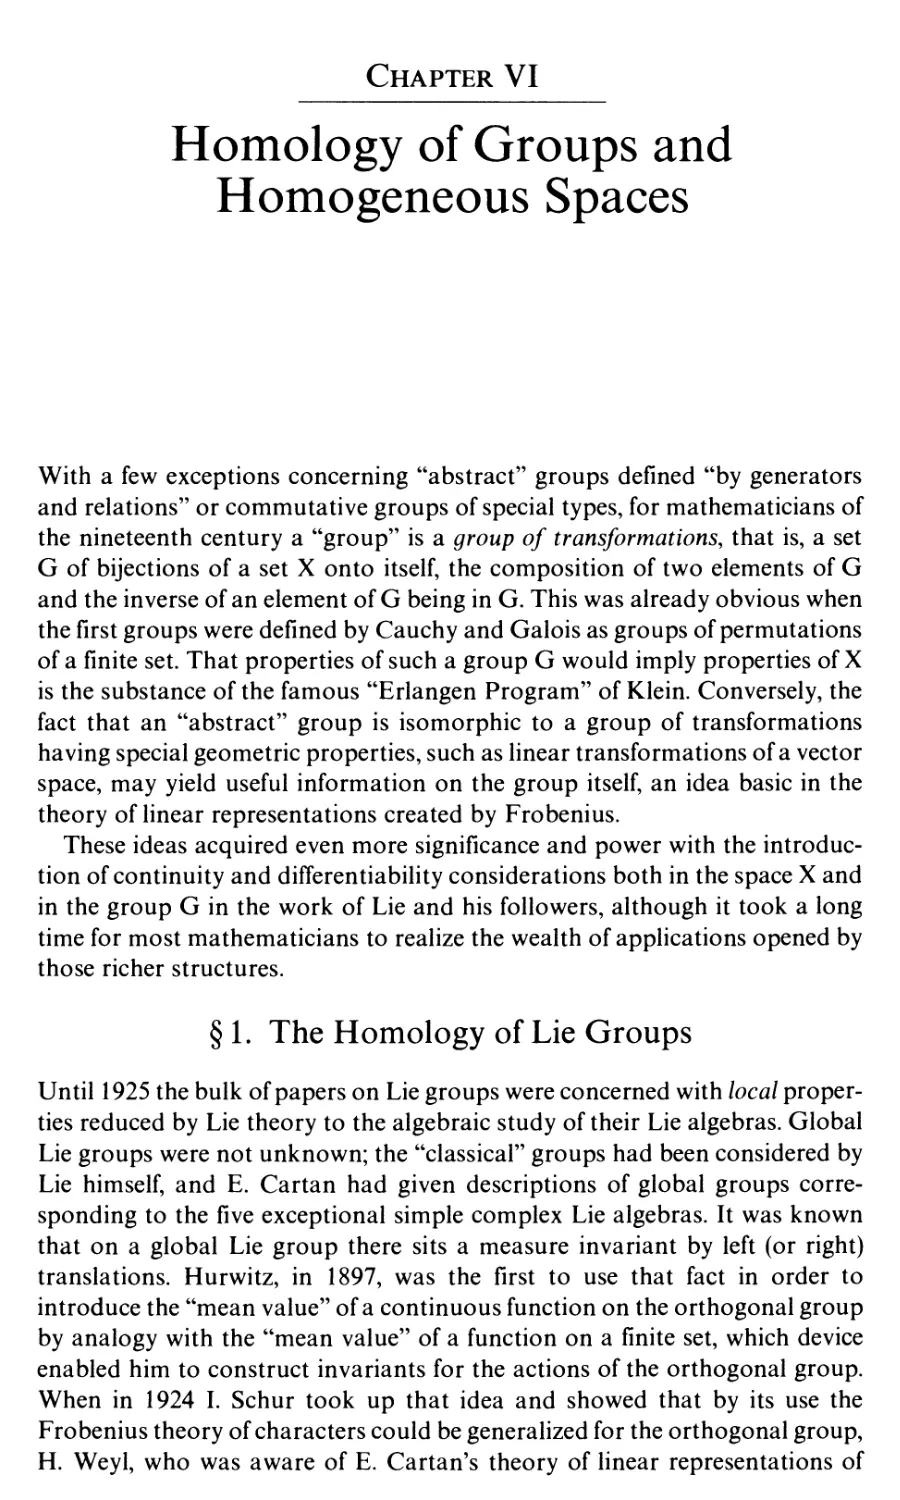 Chapter VI. Homology of Groups and Homogeneous Spaces